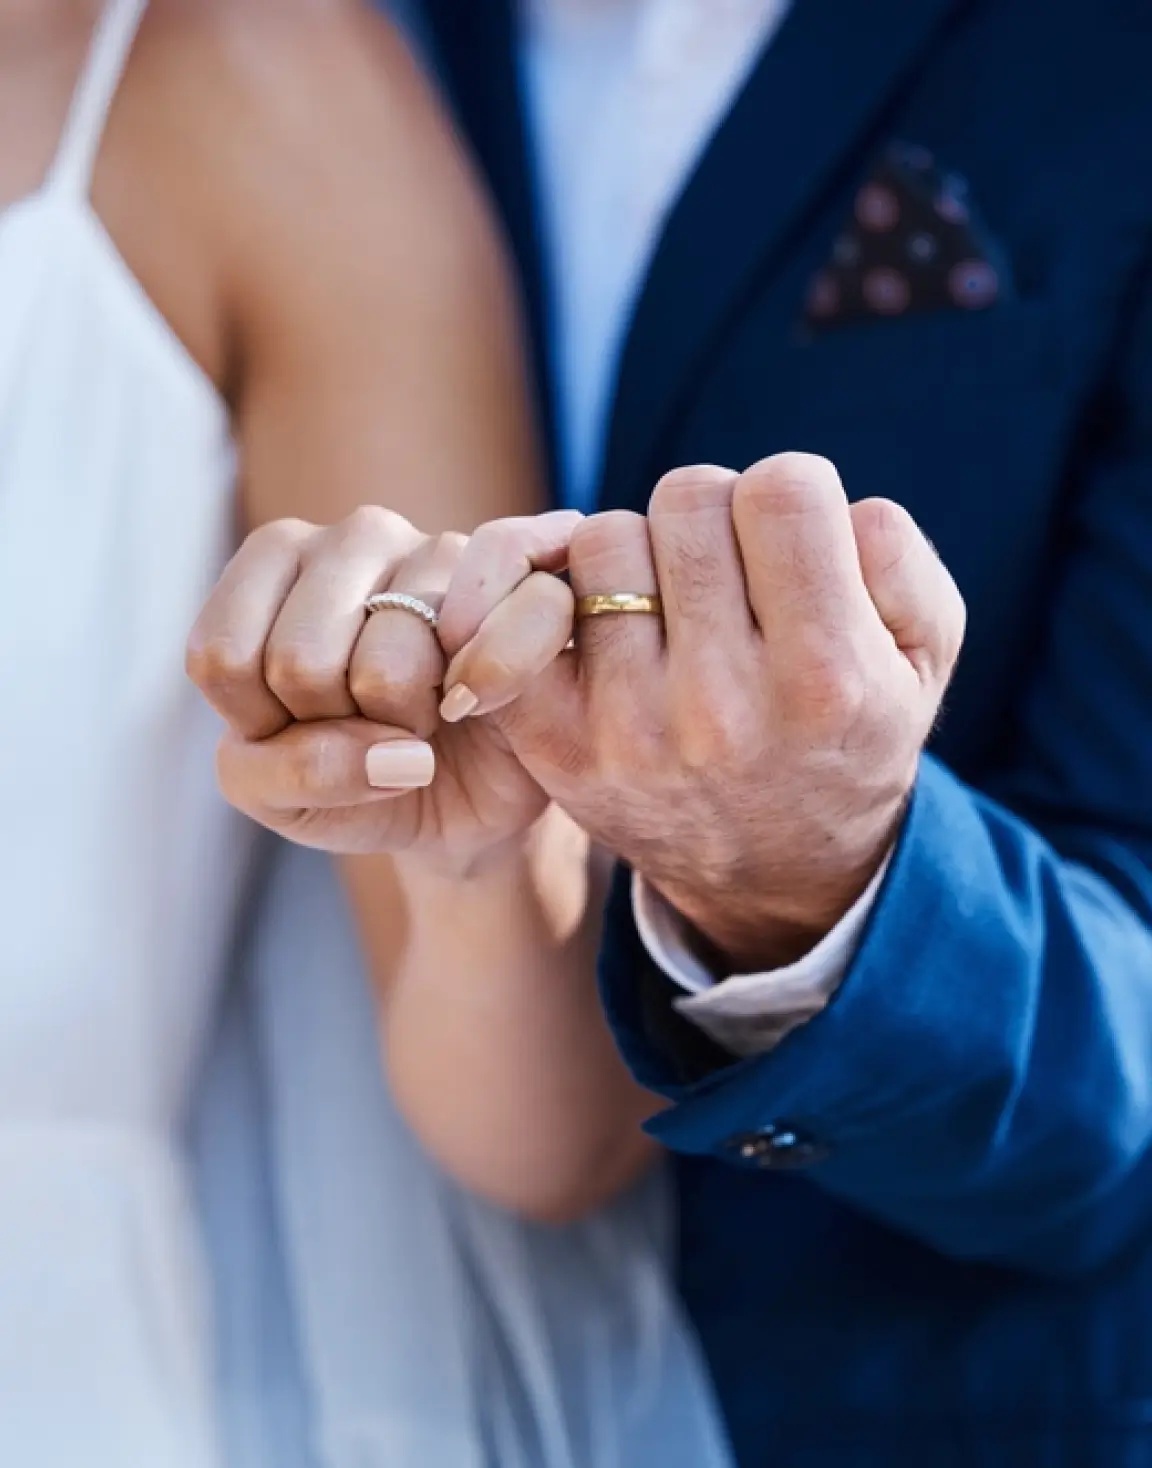 Matching Wedding Bands: Finding the Right Jeweler or Retailer